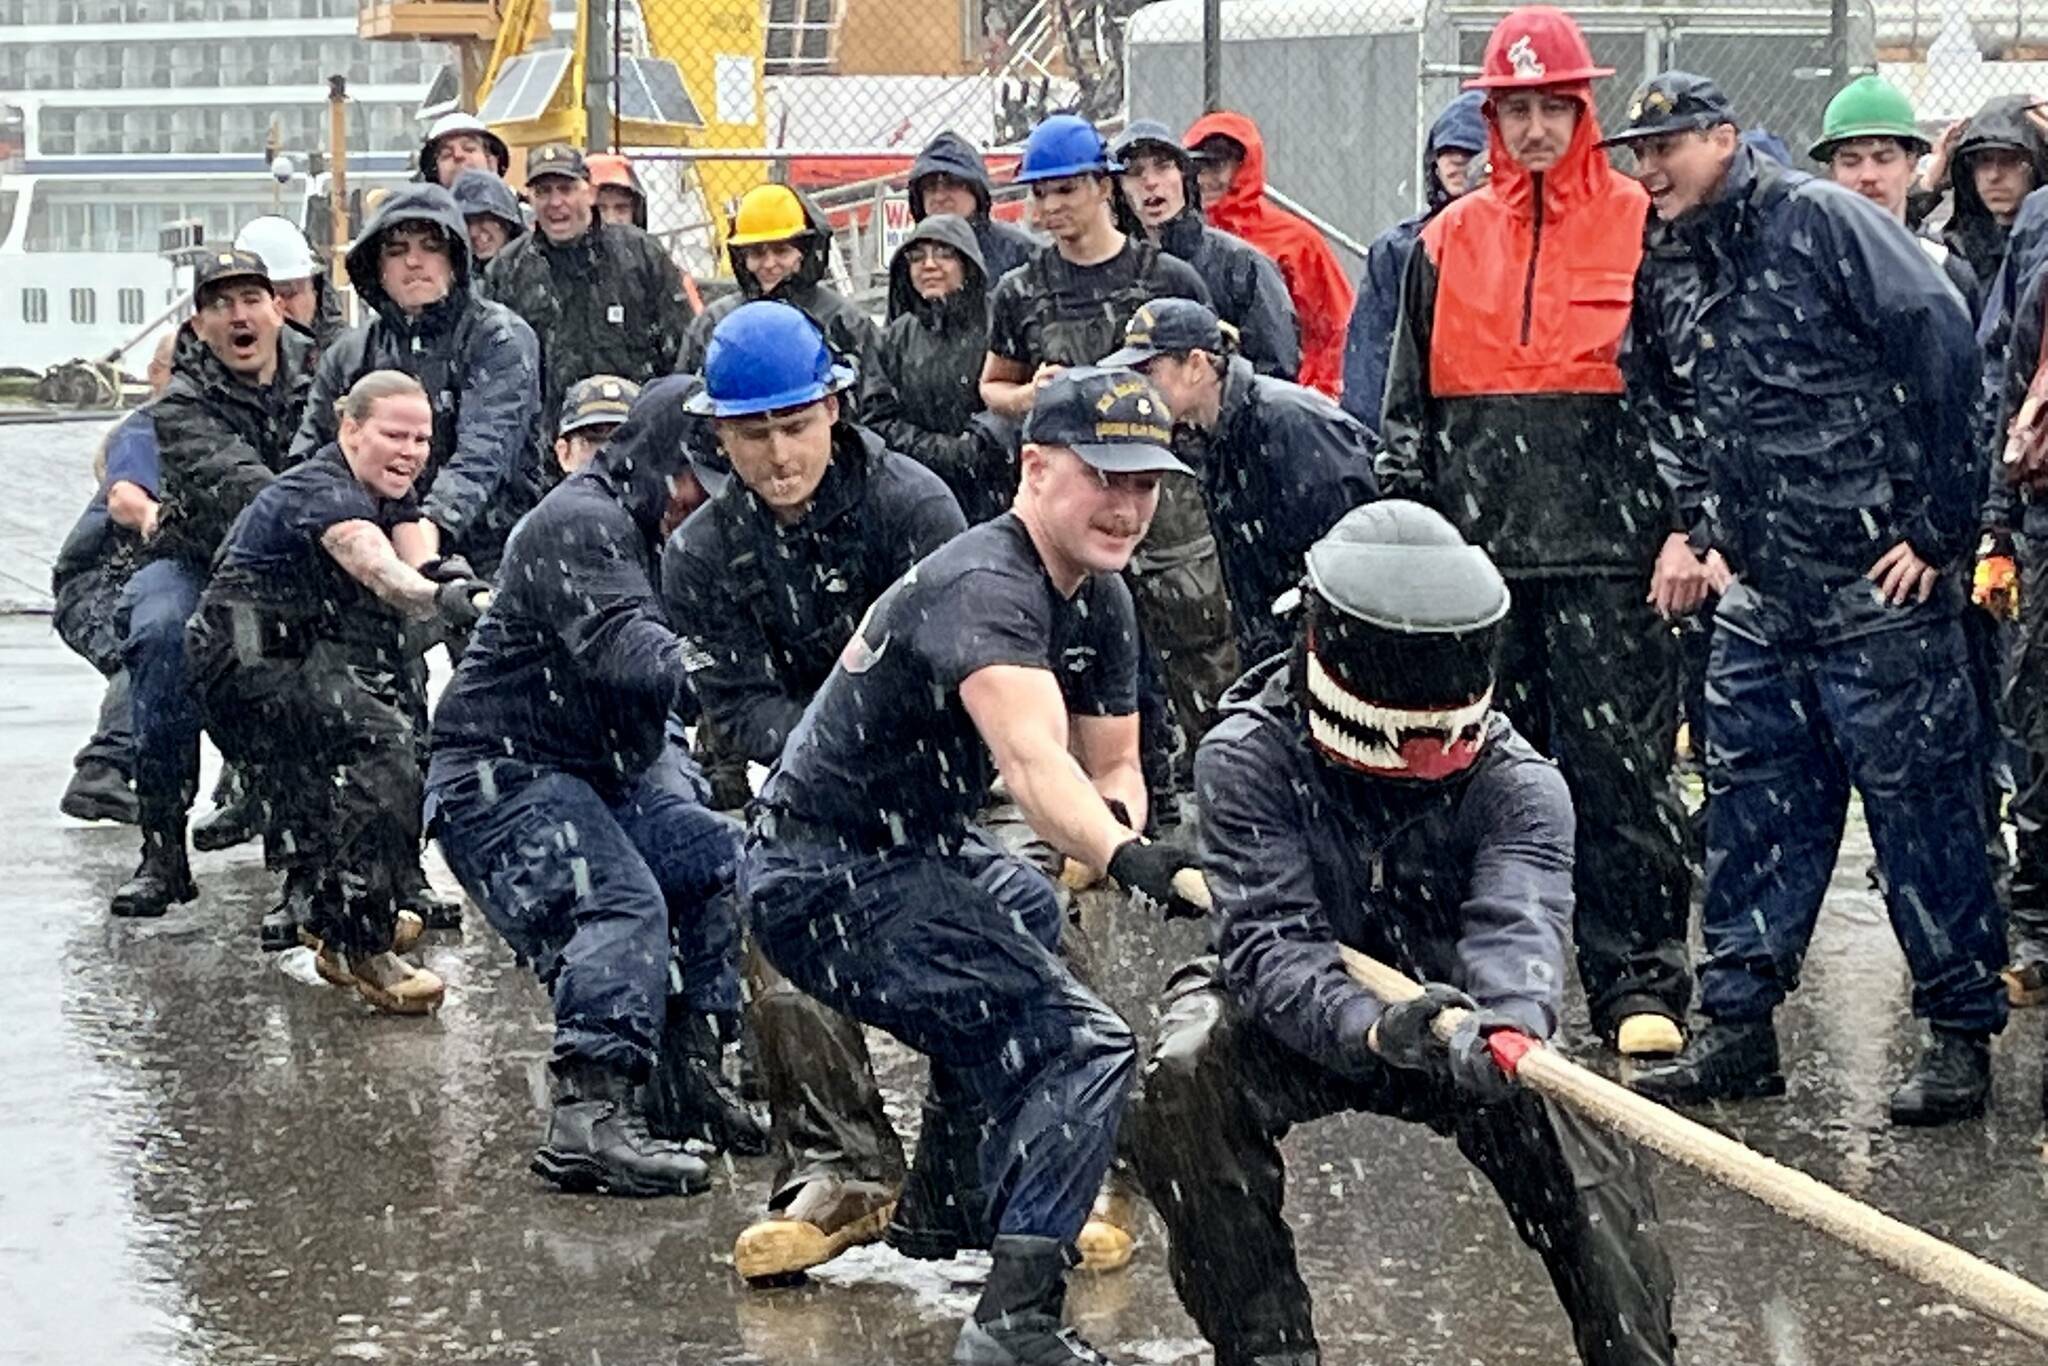 Team Elm faces off against Team Cypress in a tug of war battle in heavy rain during the U.S. Coast Guard’s annual Buoy Tender Olympics on Aug. 17 at the Coast Guard Station Juneau. (Jonson Kuhn / Juneau Empire)